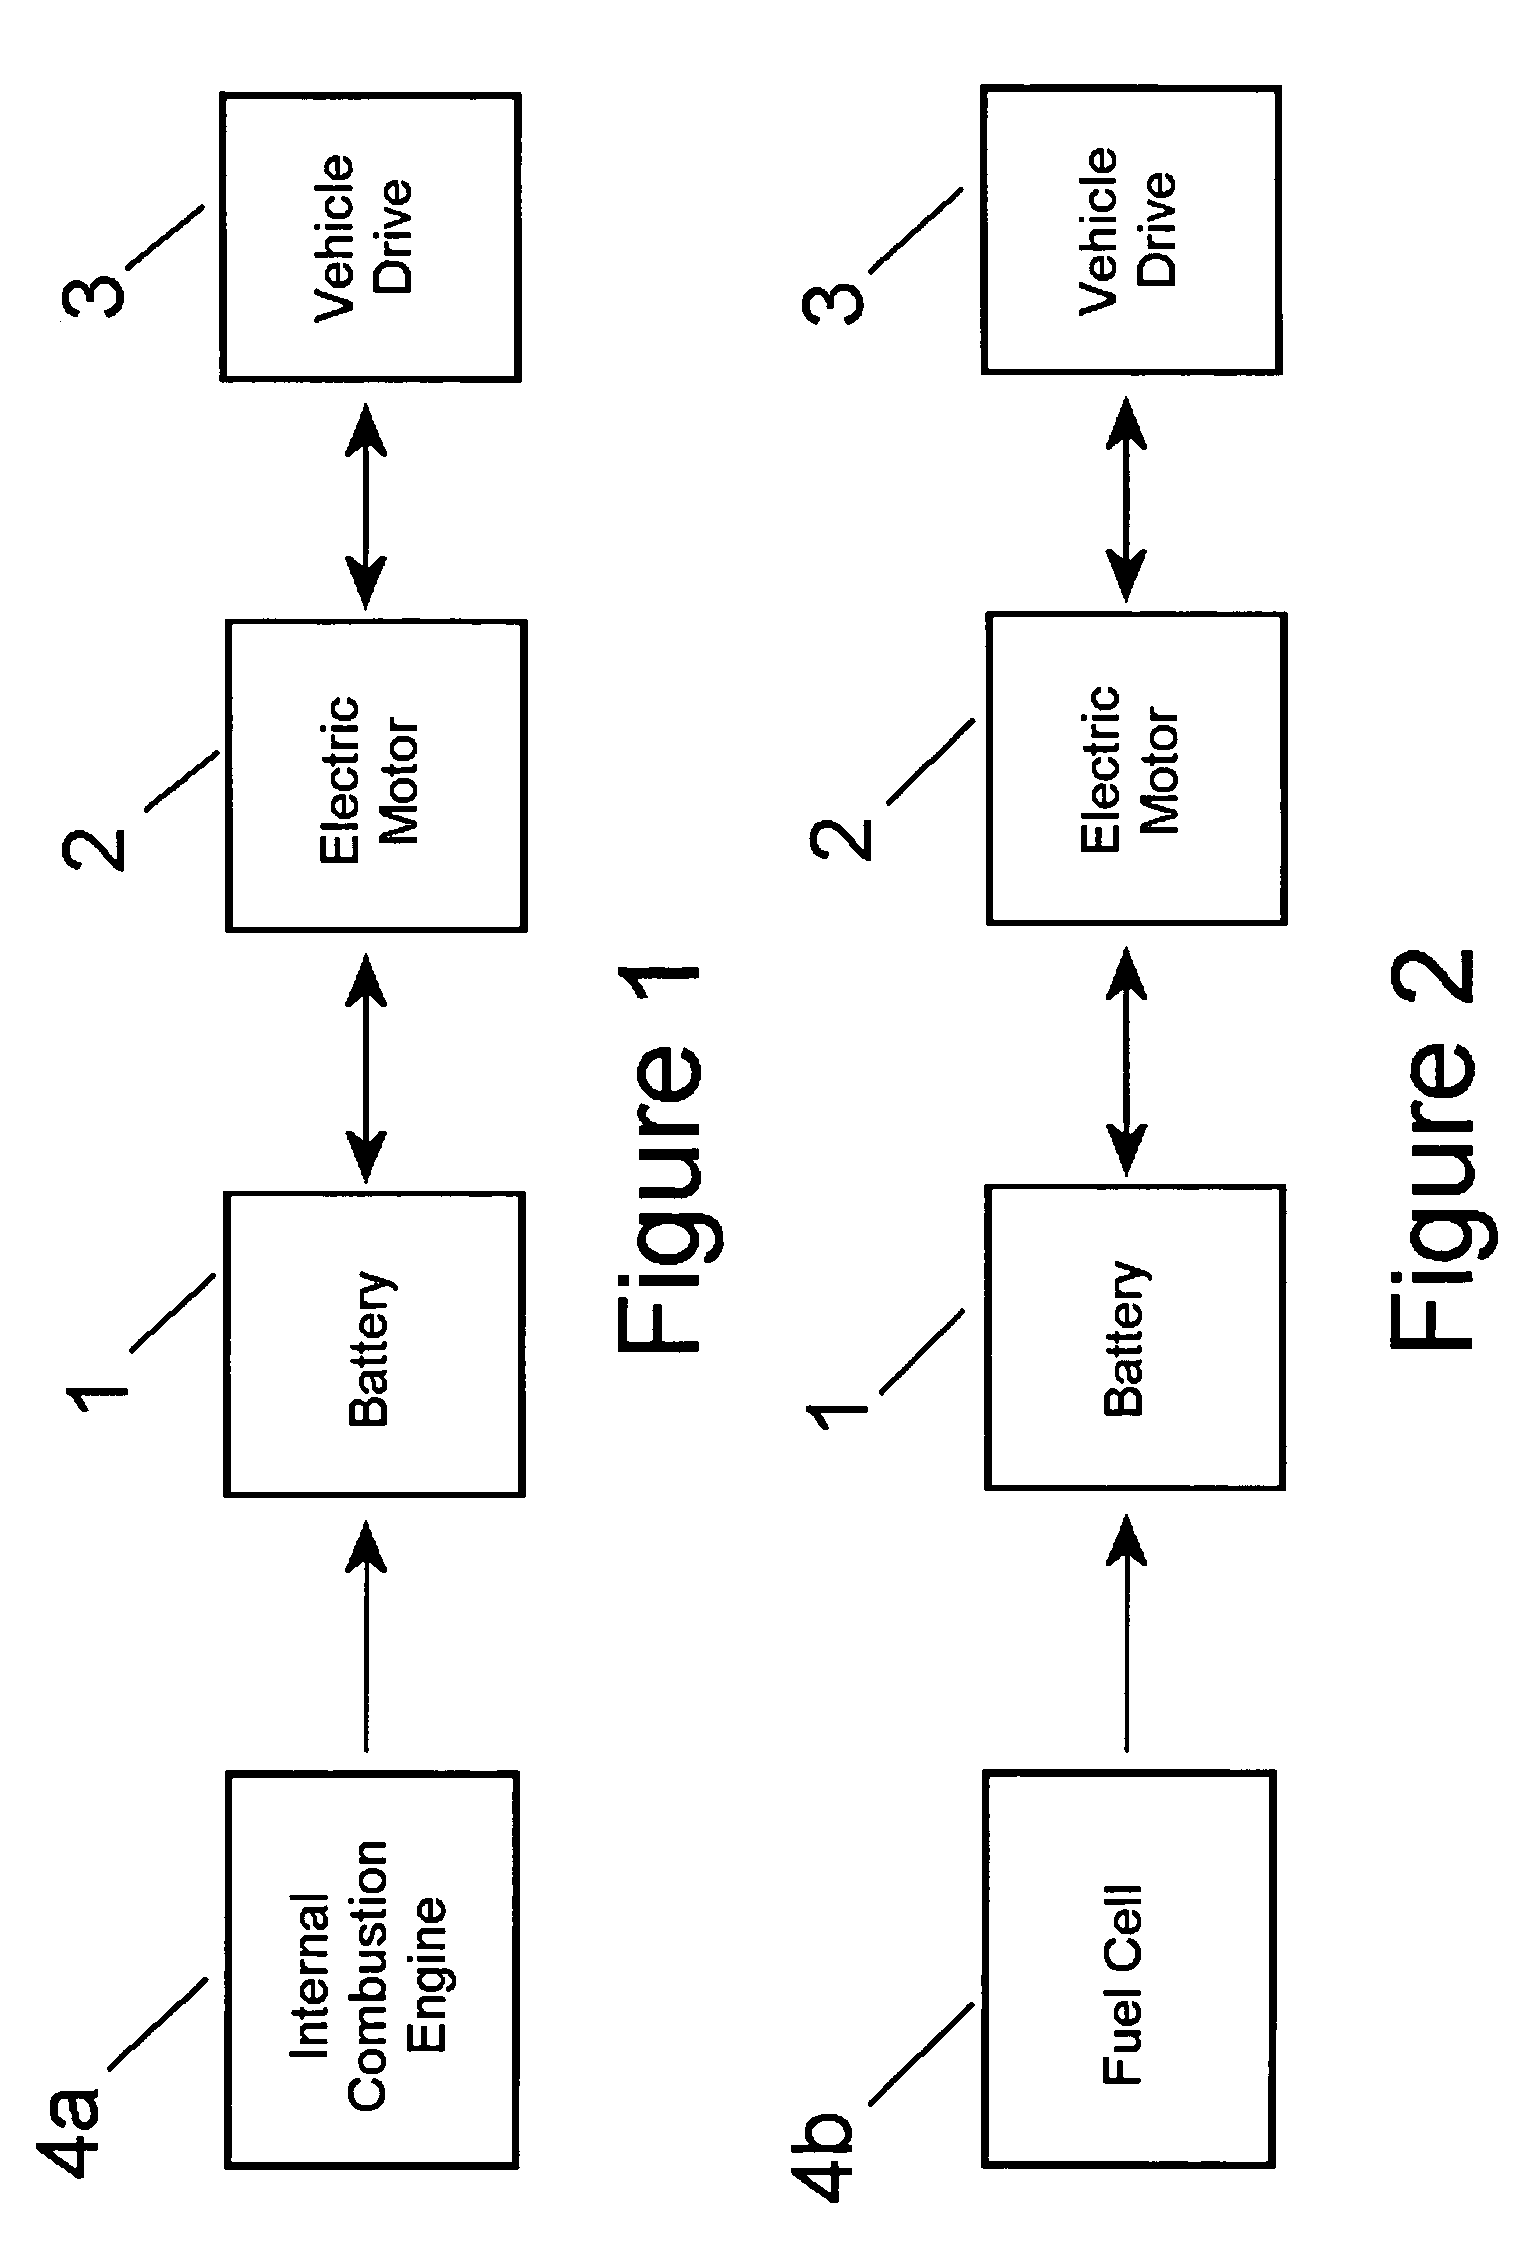 Drive system incorporating a hybrid fuel cell